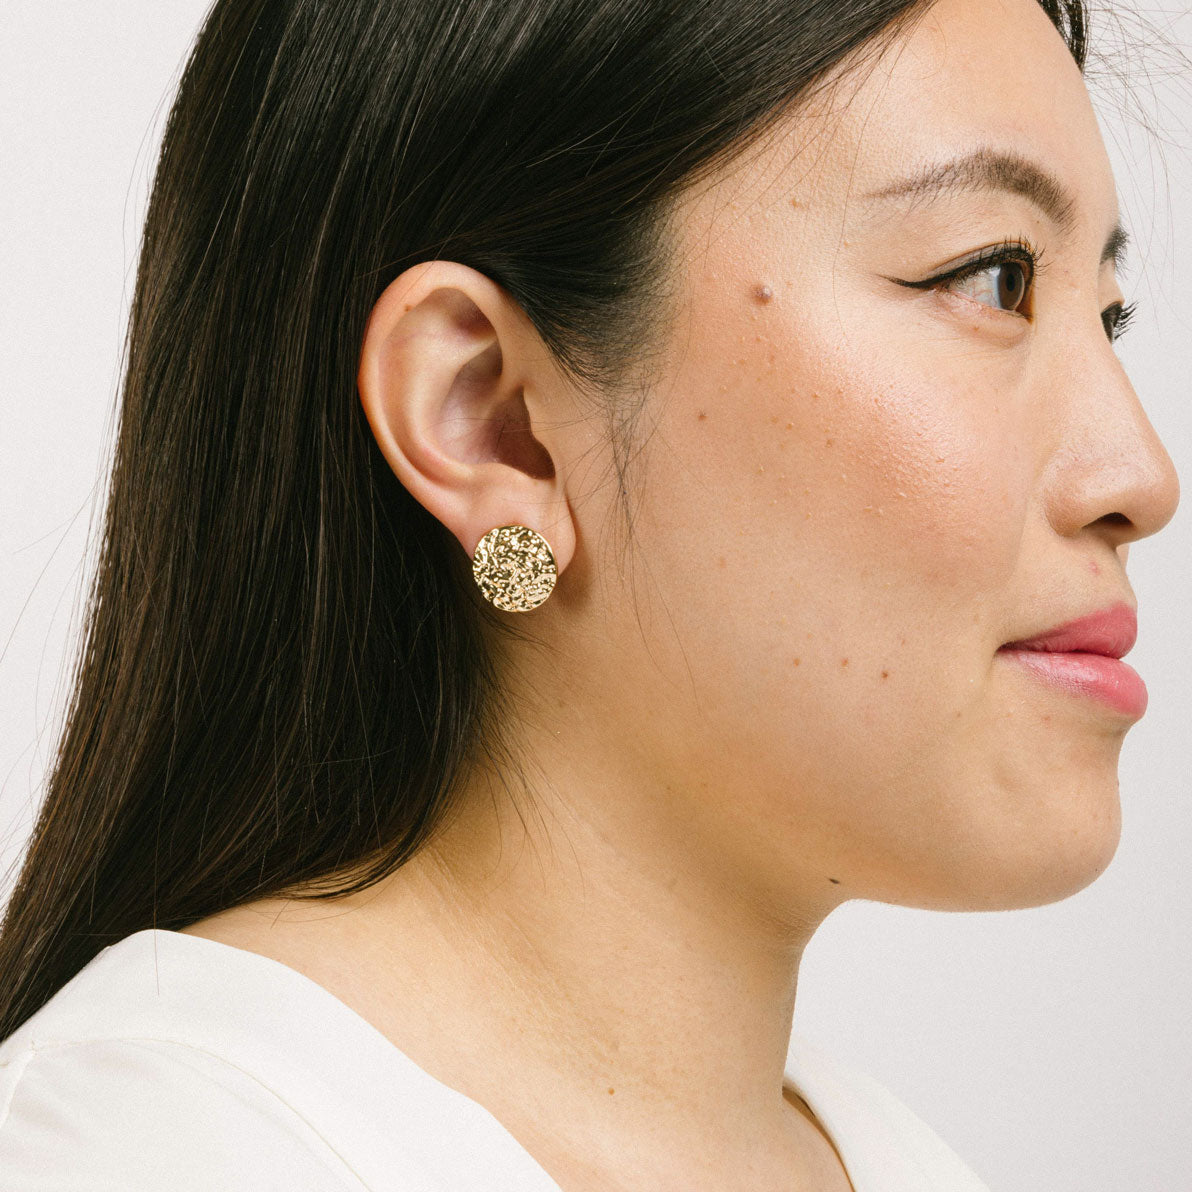 A model wearing the Paloma Clip-On Earrings in Gold provide a secure fit that is perfect for all ear types, including thick/large ears, sensitive ears, small/ thin ears, and stretched/healing ears. These earrings are crafted with a copper alloy and are free of lead and nickel. Their removable rubber padding ensures comfortable wear for up to 12 hours. This package contains one pair of earrings.